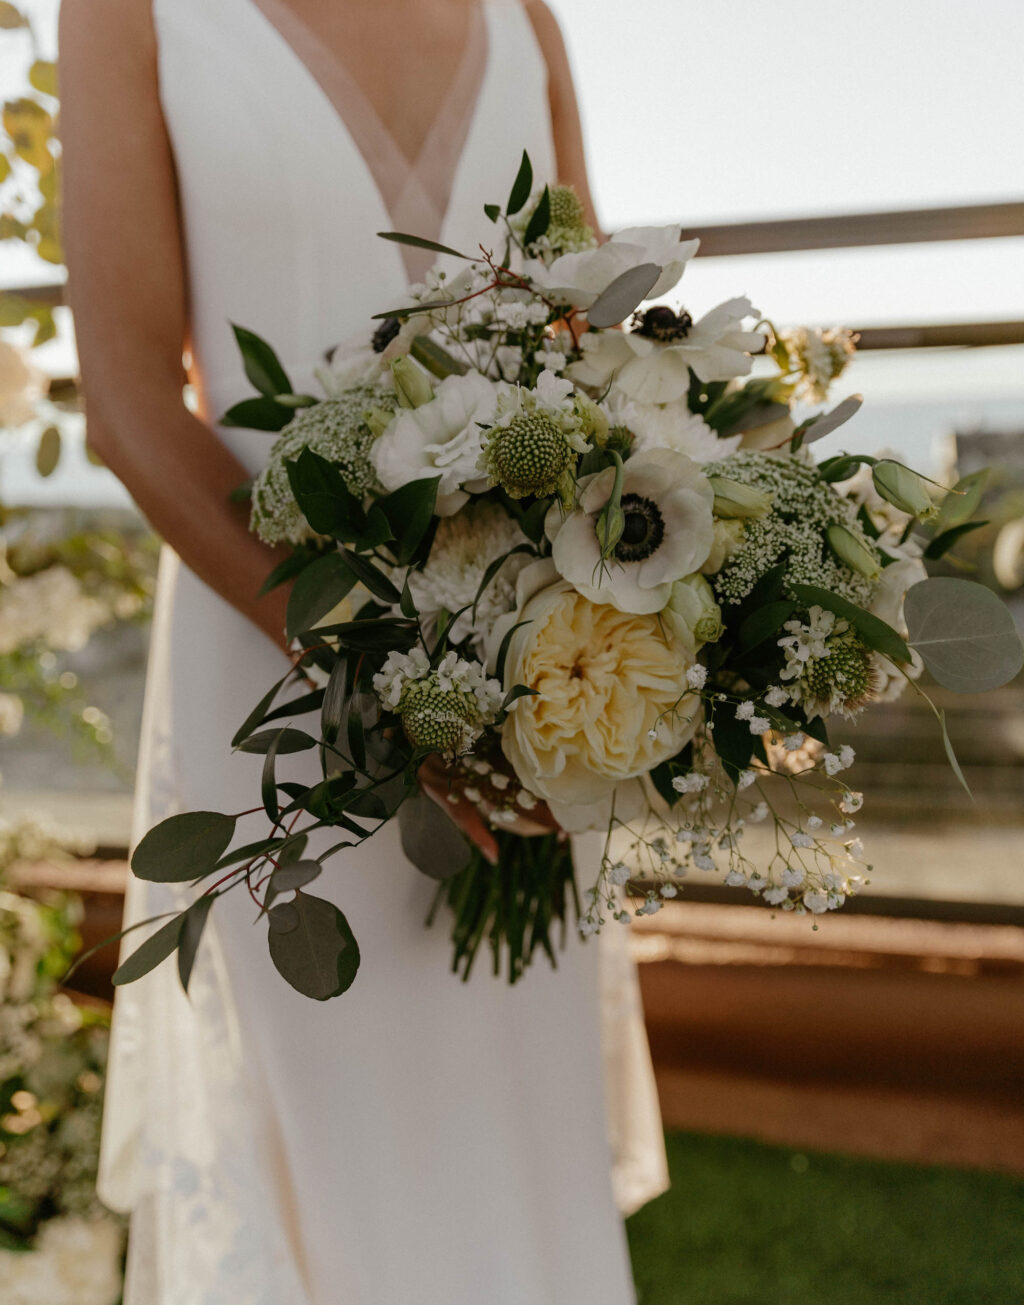 Beachy White and Cream Bridal Bouquet with Greenery Details Inspiration | St. Petersburg Florida Lemon Drops Weddings & Events